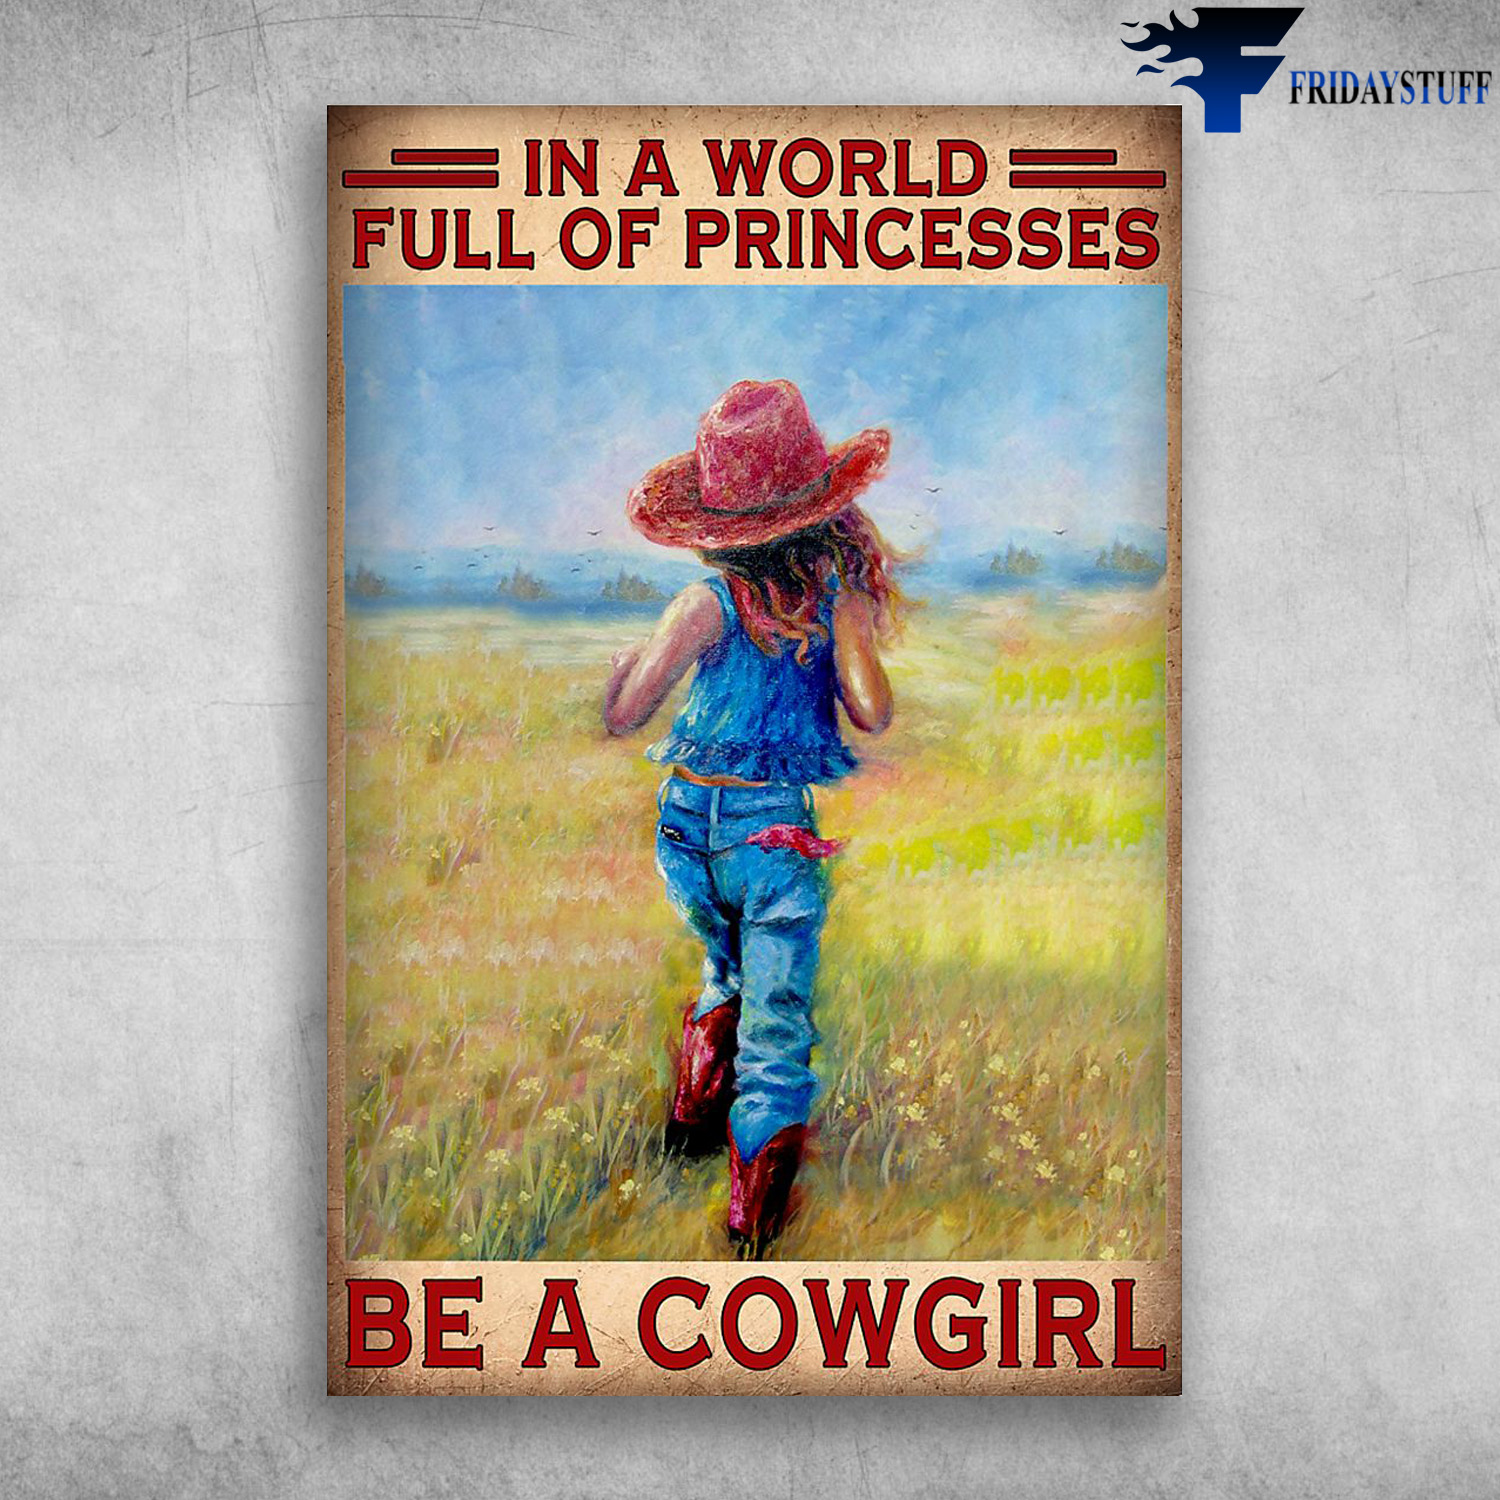 Little Cowgirl On The Grass - In A World Full Of Princesses, Be A Cowgirl